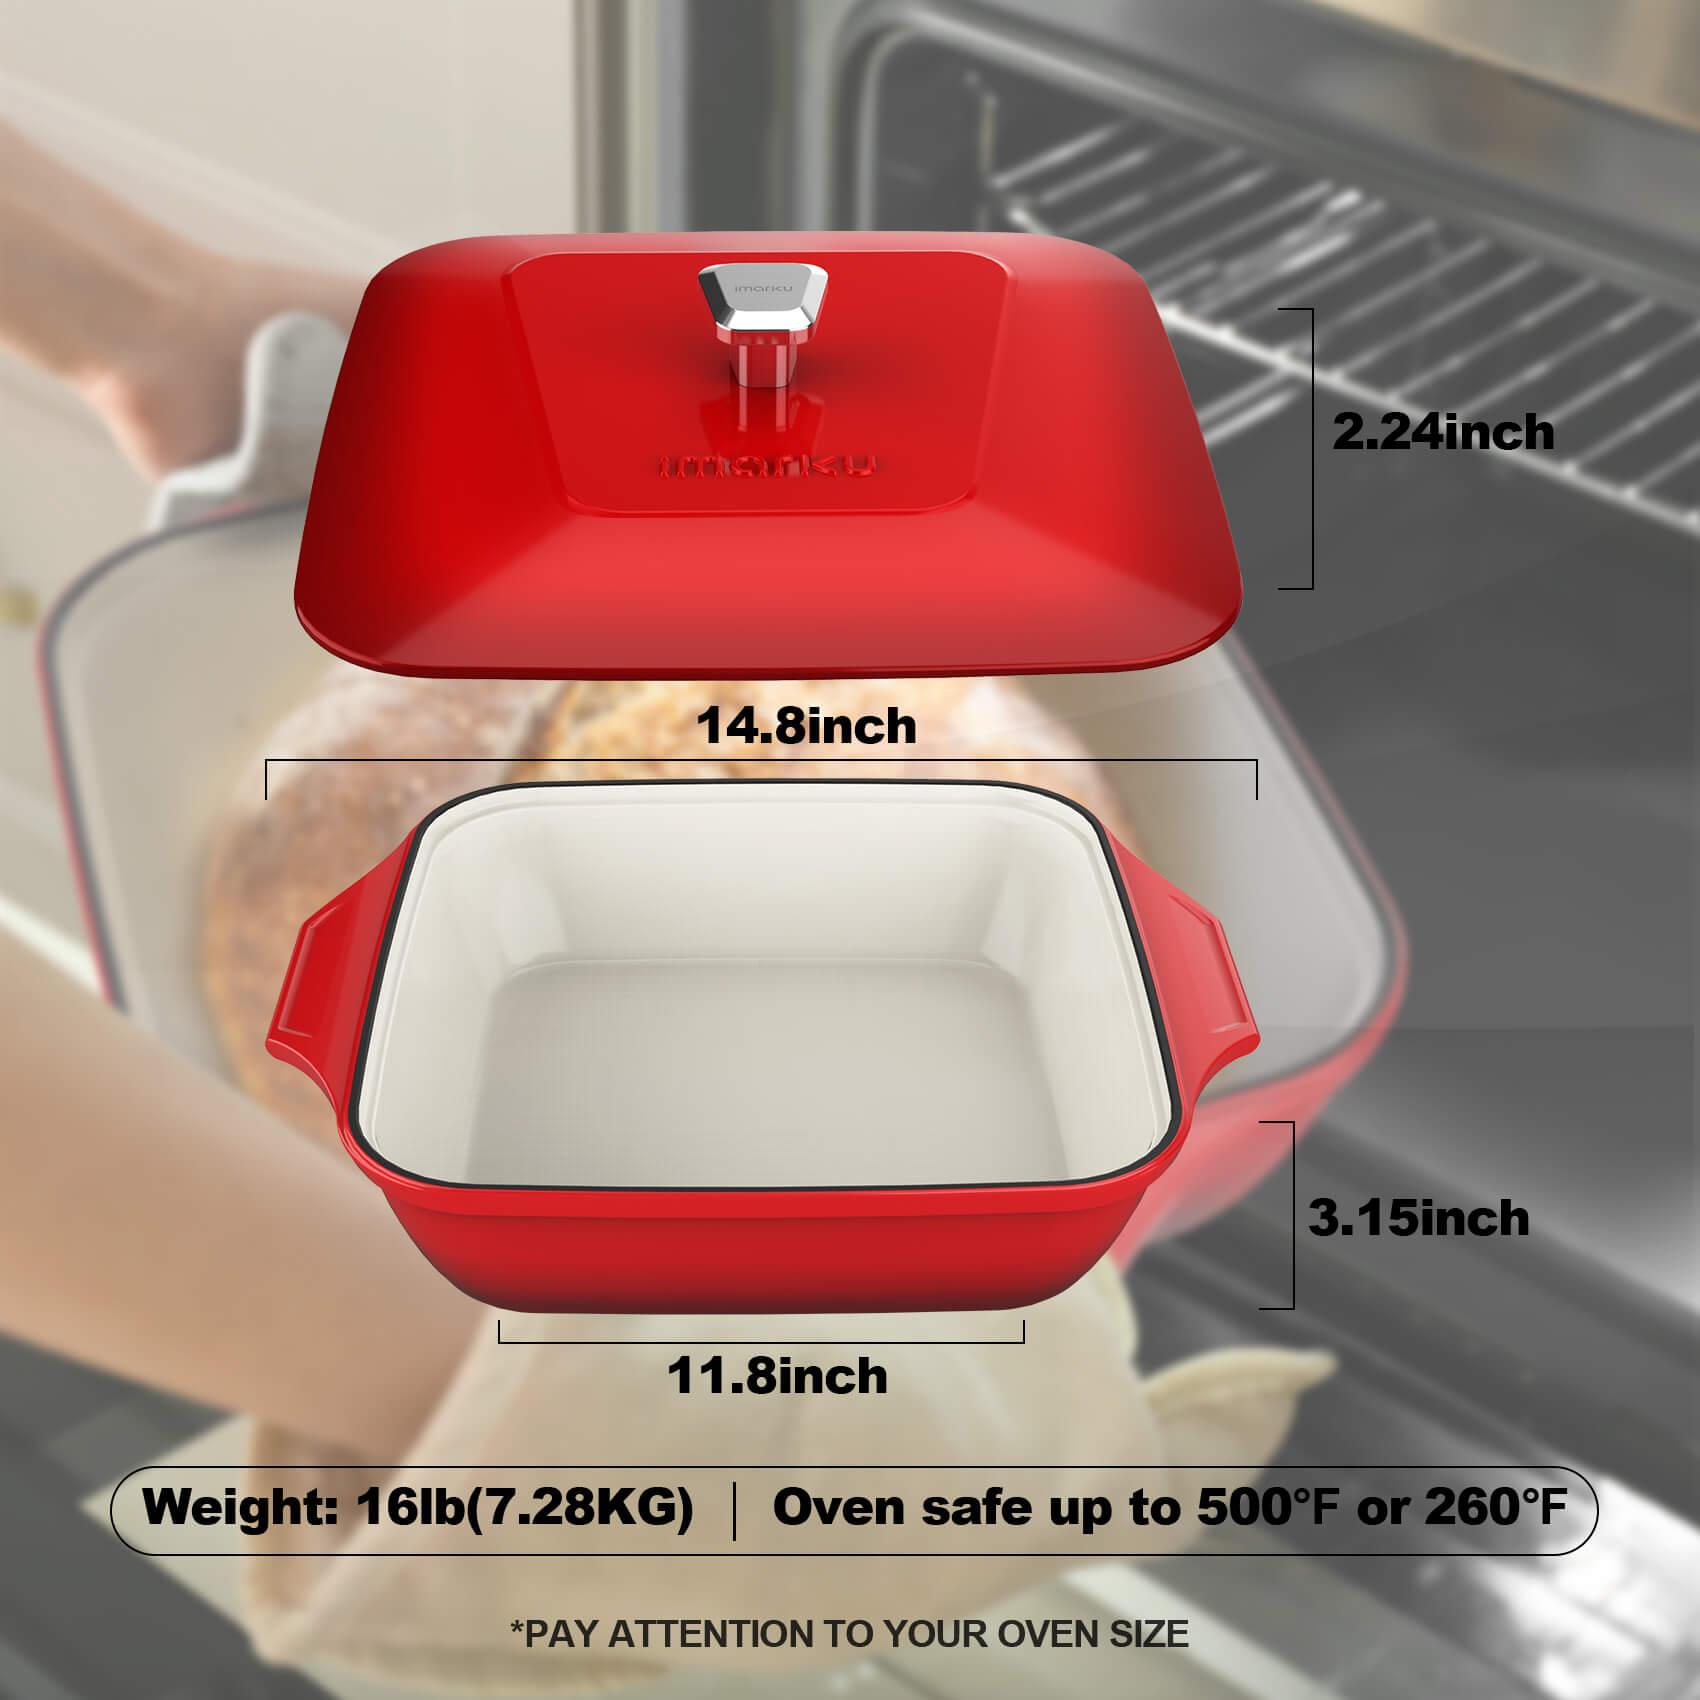 imarku Dutch Oven, 3.5 QT Cast Iron Dutch Oven Pot with Lid, Nonstick  Enameled Coating Dutch Oven for Sourdough Bread Baking, Heavy Duty Dutch  Ovens Suitable for Variety Stovetop, Red - Yahoo Shopping